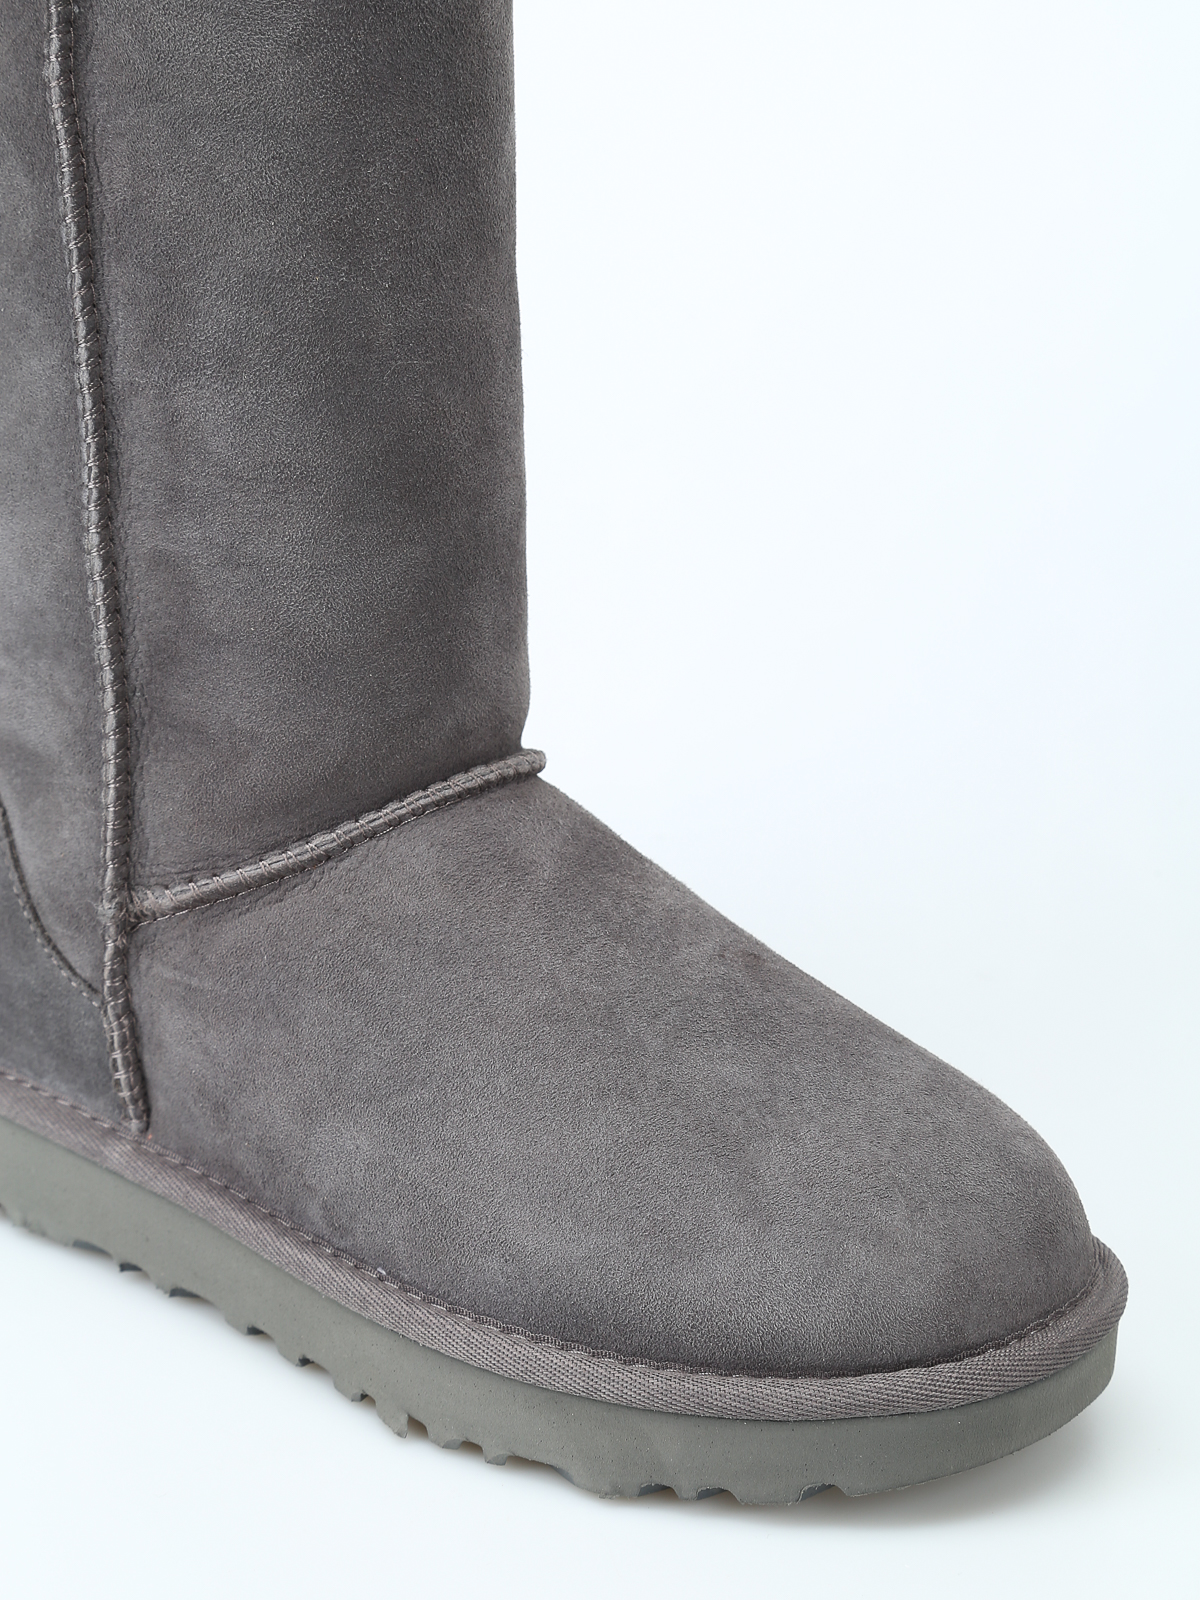 uggs grey boots